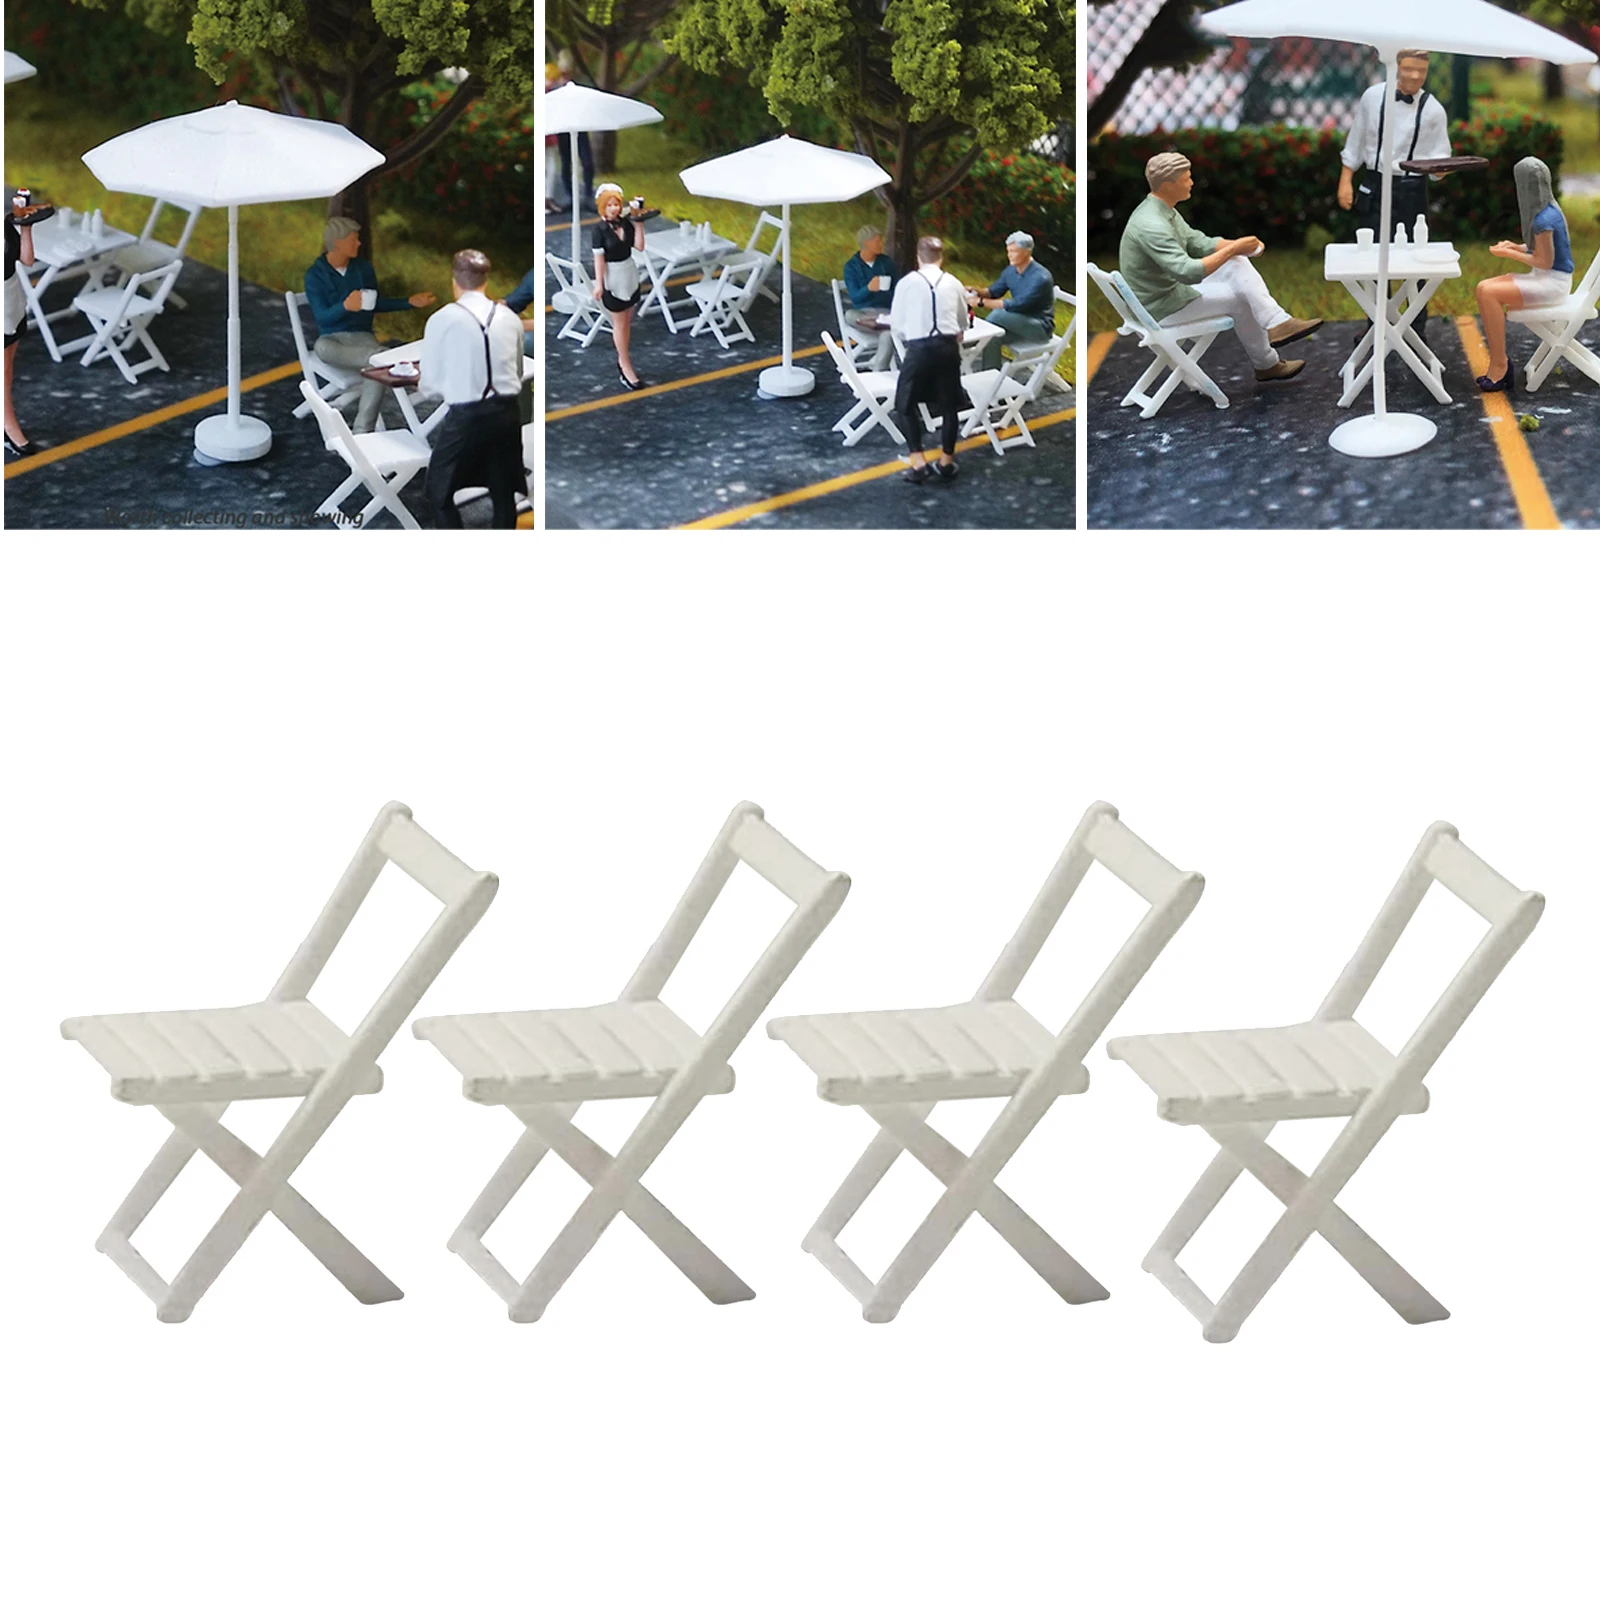 4pcs 1:64th Figures Model Resin Chair for Miniature Scenes, Diorama Decoration Accessories